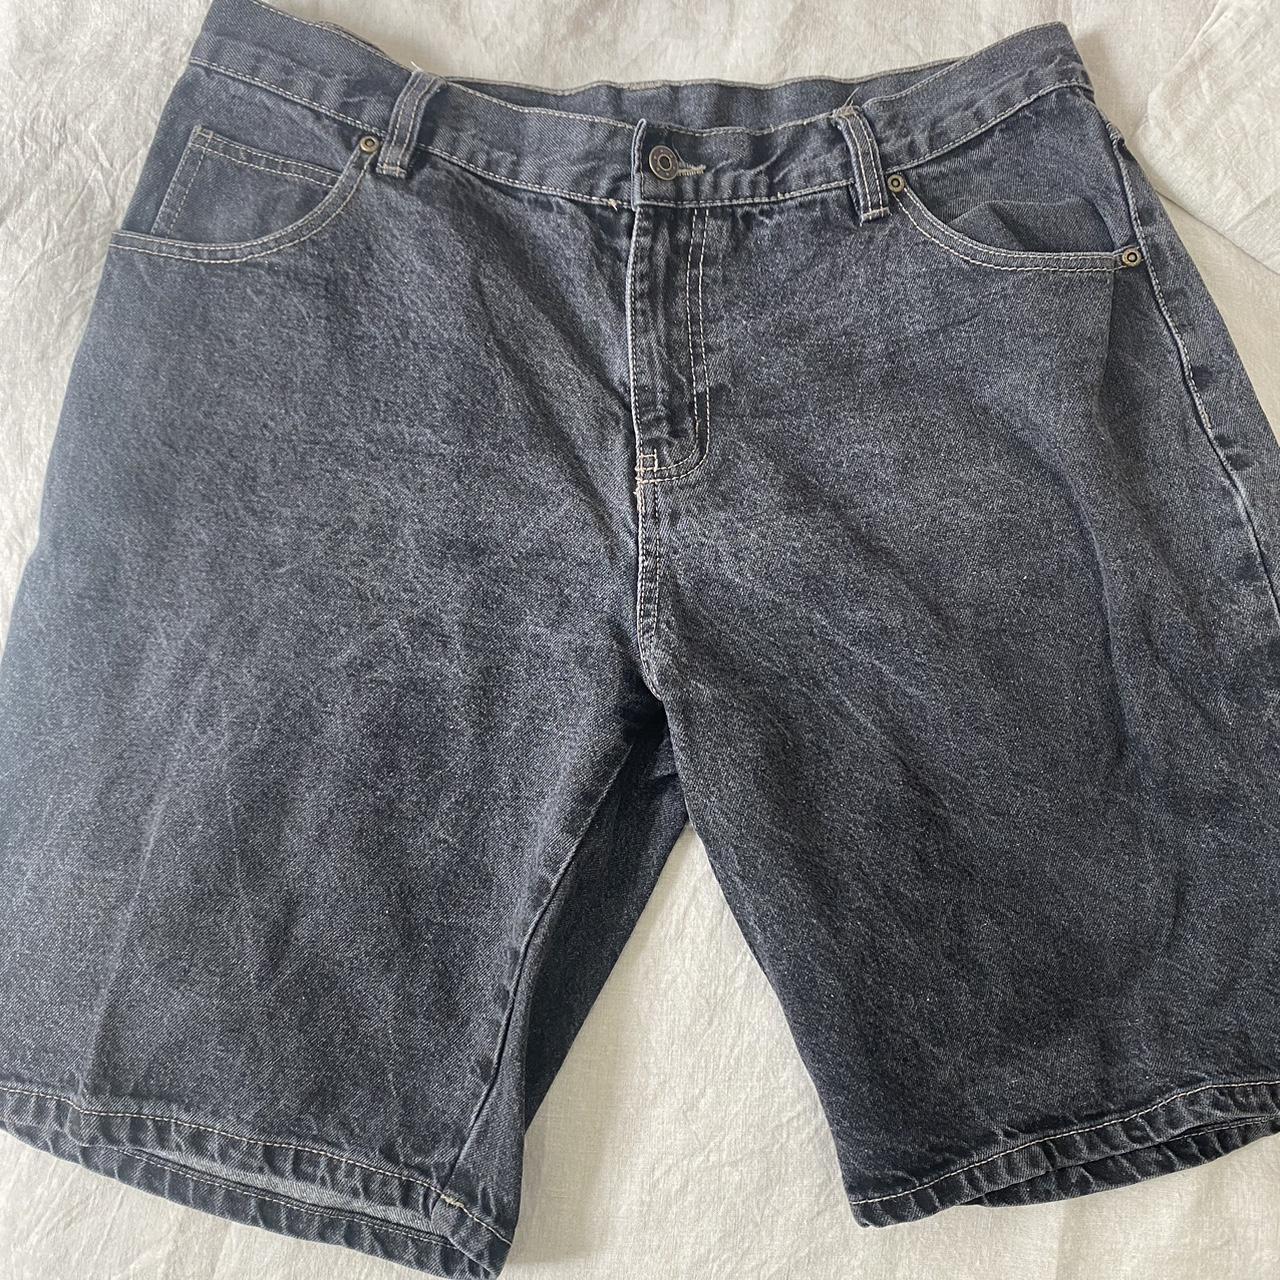 Black wash jorts - doesn’t have a size but I would... - Depop